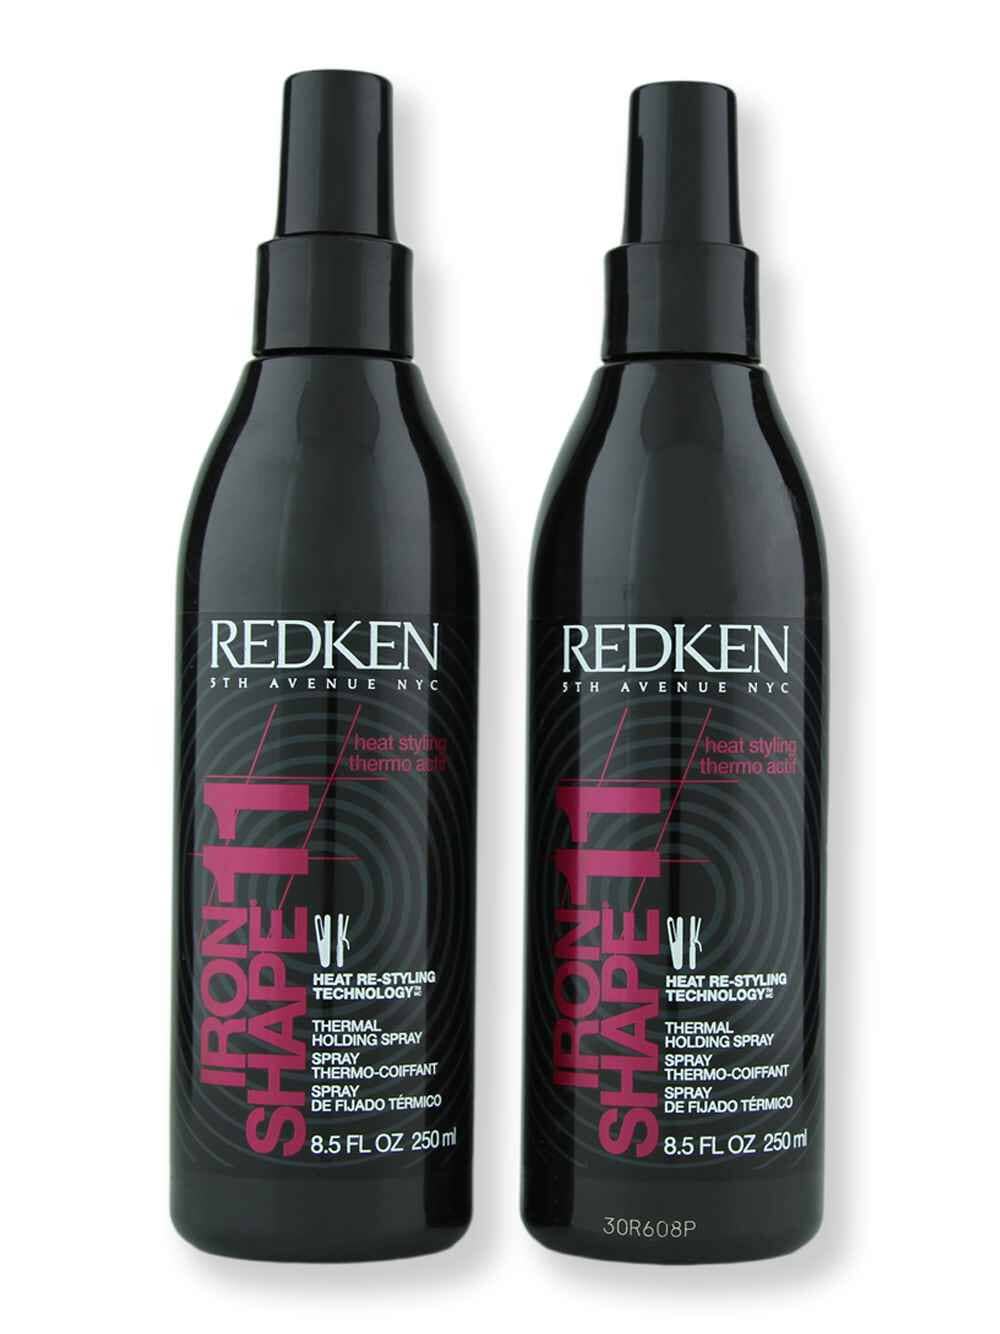 Redken Redken Iron Shape 11 Thermal Holding Spray 2 ct 8.5 oz Styling Treatments 